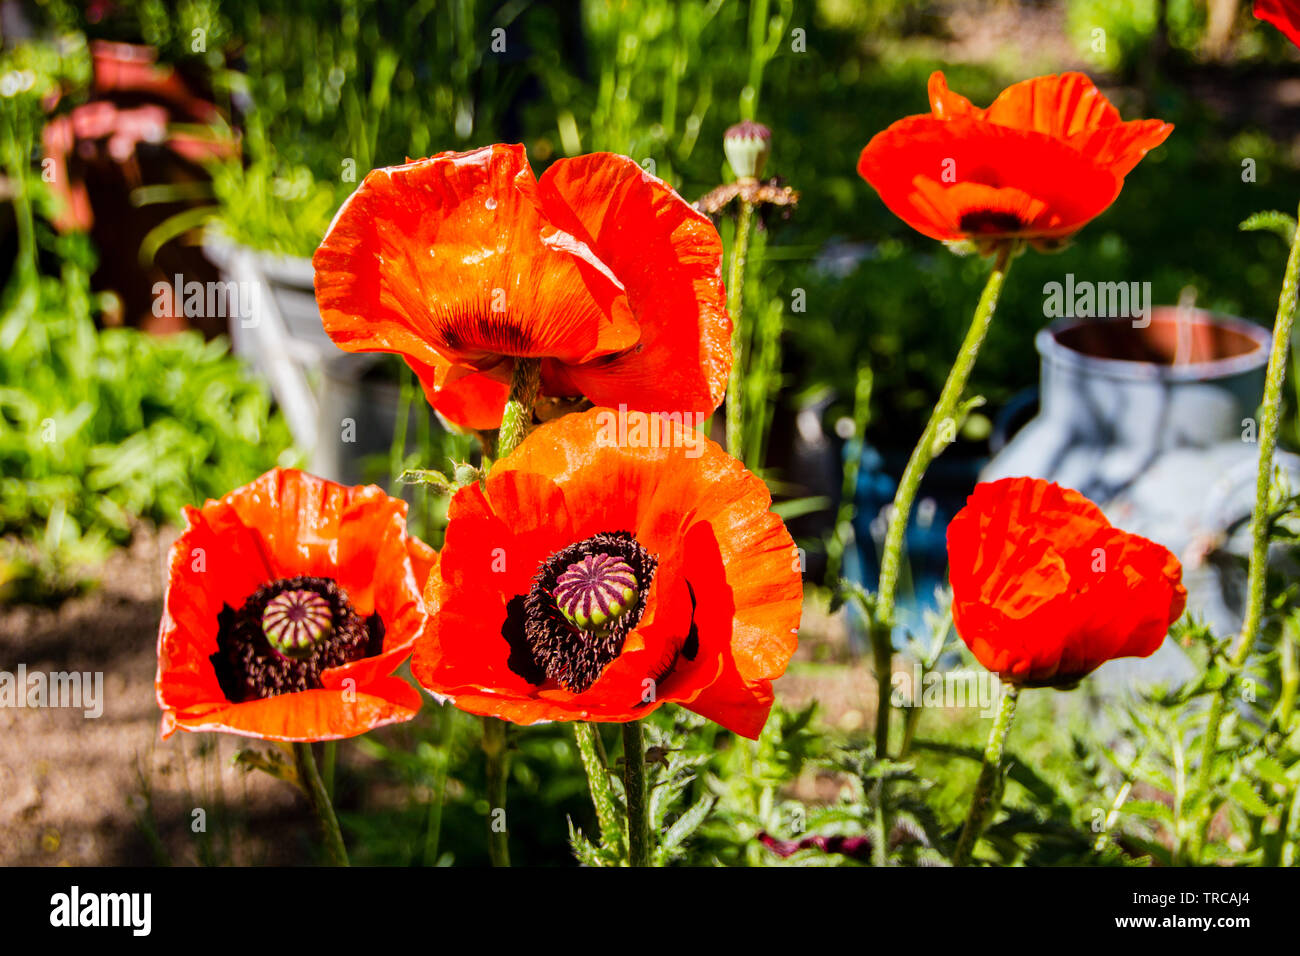 Huge orange Oriental poppies (Papaver orientale) have a radiant and papery blooms with black eyes. The leaves are fuzzy and coarsely cut. Stock Photo